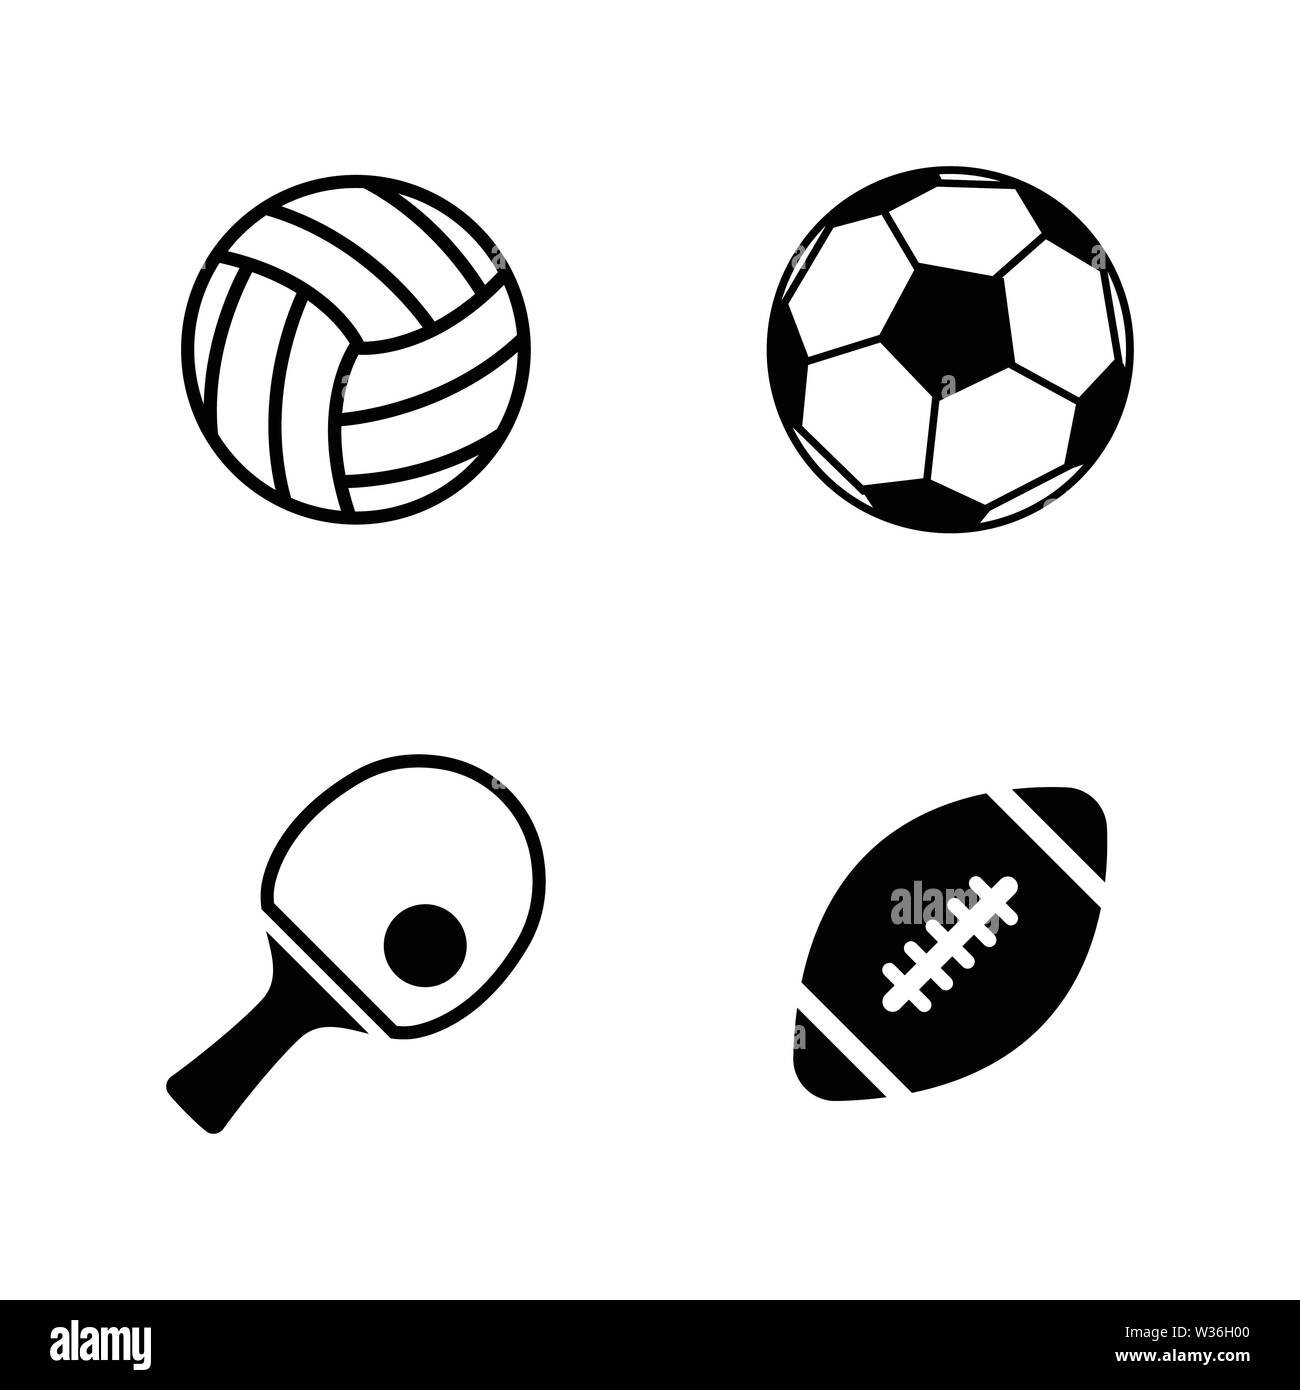 Sport Balls. Simple Related Vector Icons Set for Video, Mobile Apps, Web Sites, Print Projects and Your Design. Sport Balls icon Black Flat Illustrati Stock Vector